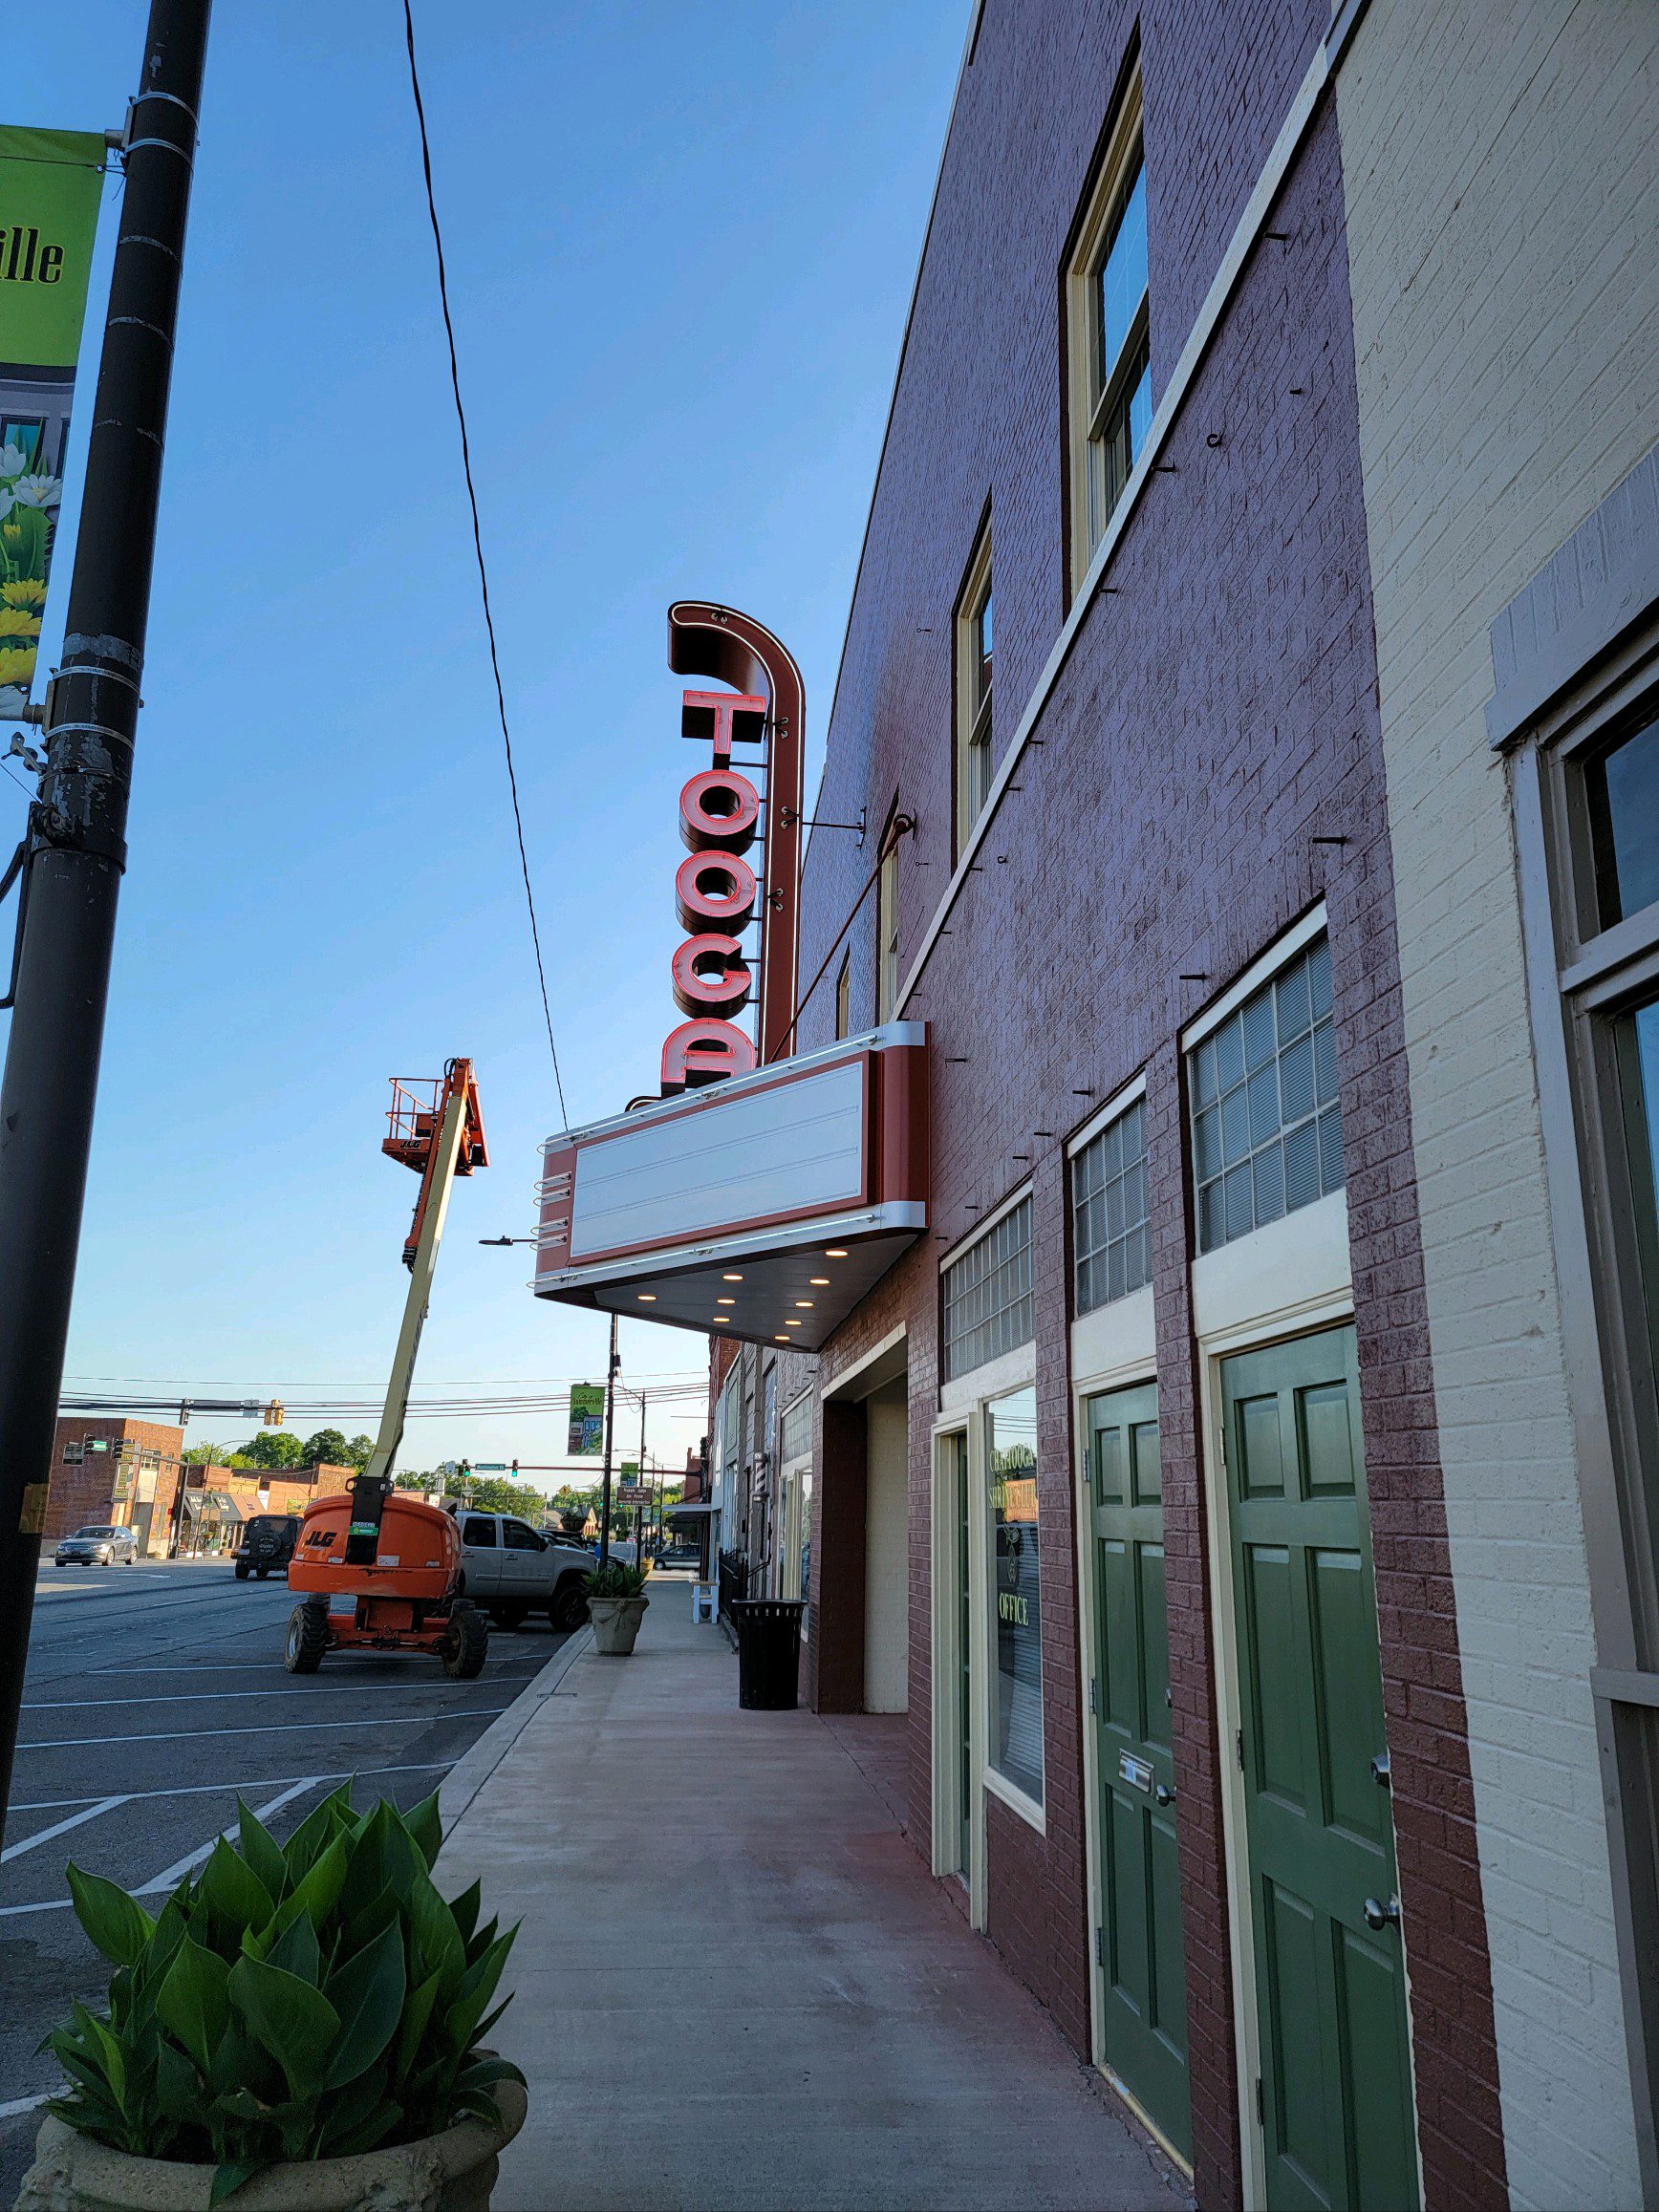 LED theatre sign for Tooga Theatre in Summerville, GA